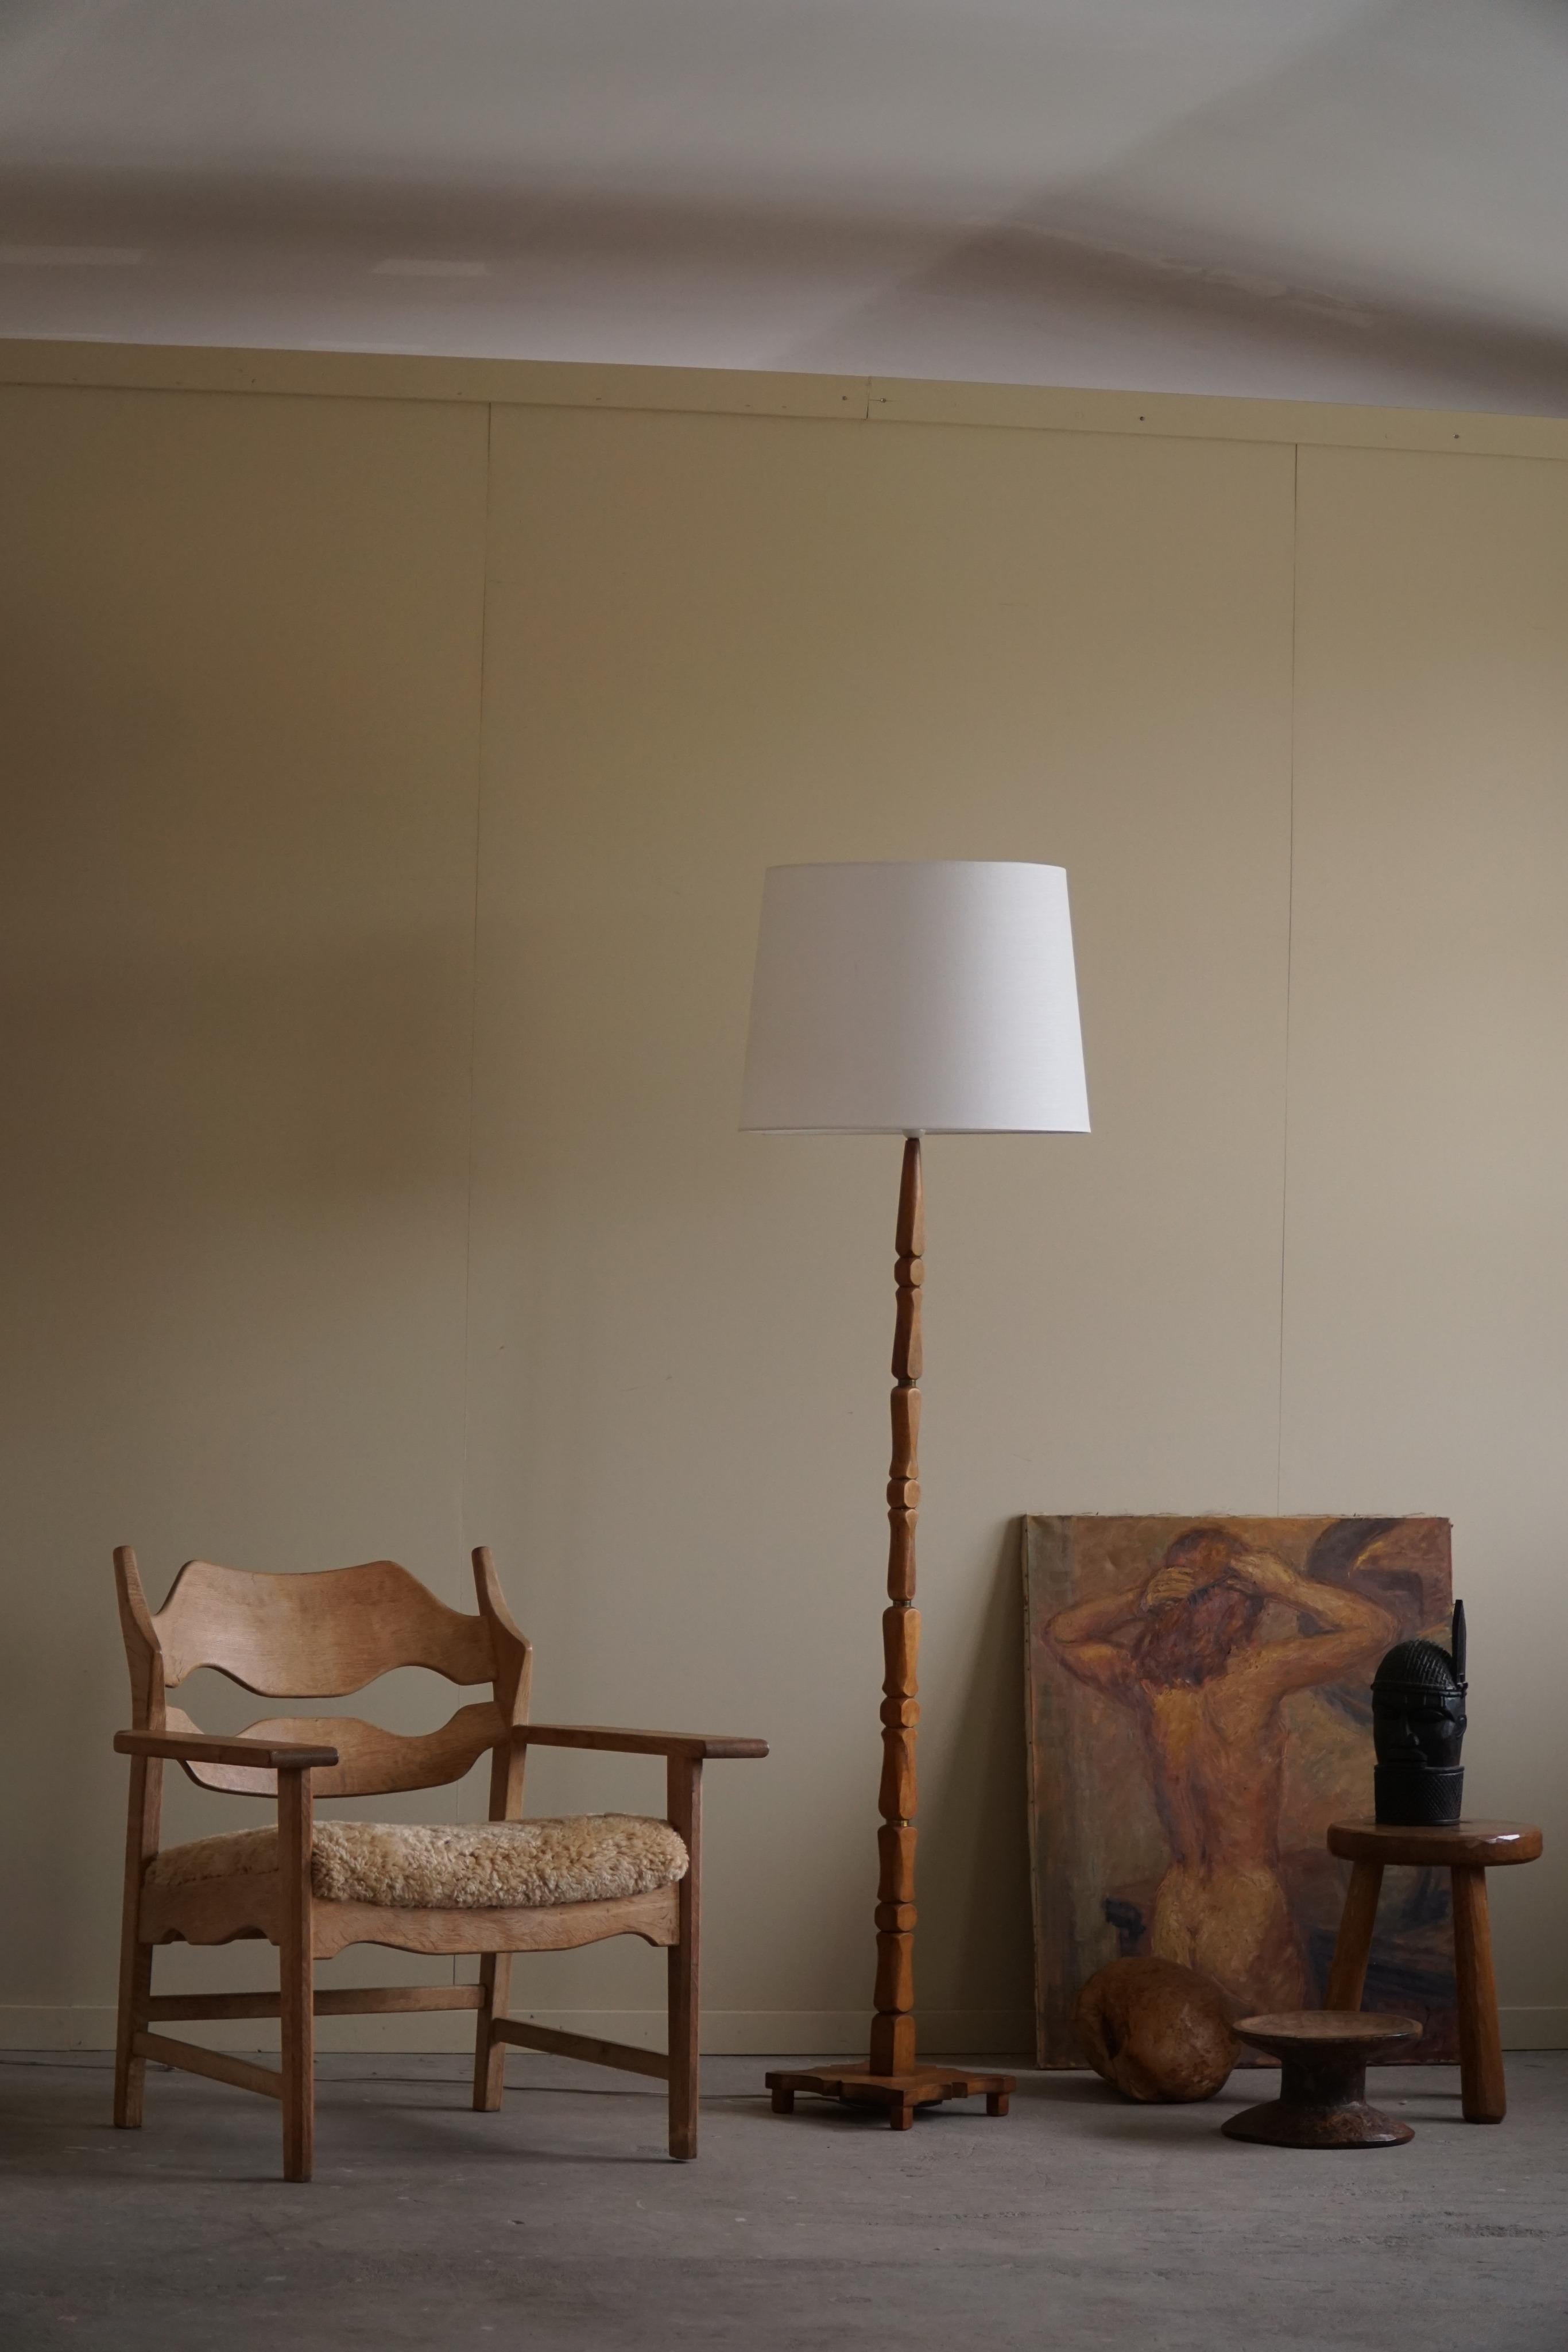 A charming decorative floor lamp in solid oak. Beautiful carved body featured in this vintage light.
Fine craftmanship, perfectly suited for any interior style. A Modern, Scandinavian, Classic or an Art deco home decor.

A beautiful example and a